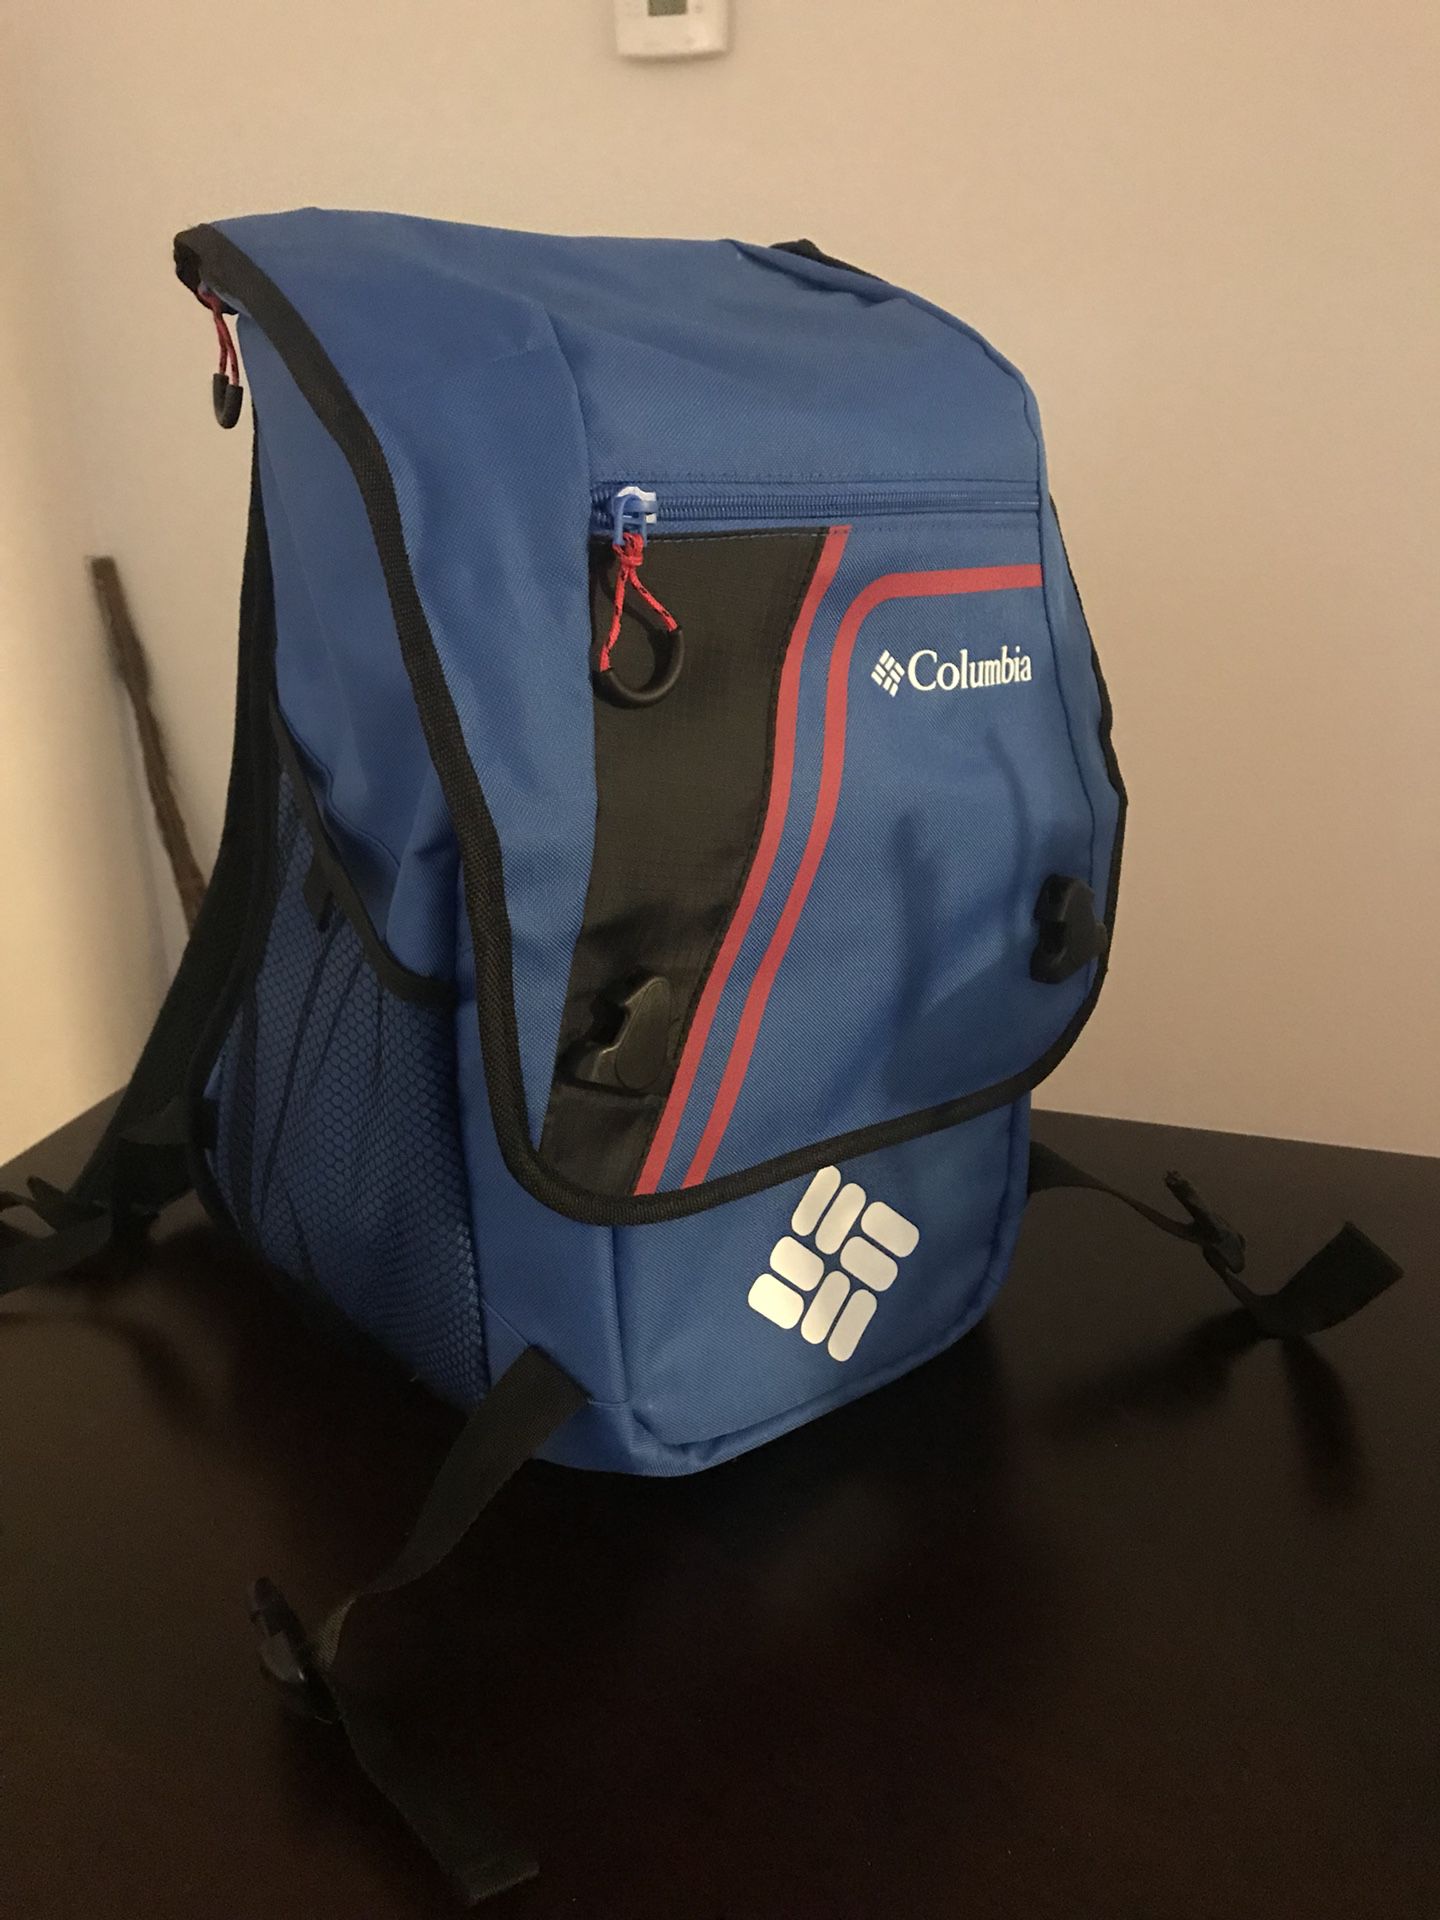 Columbia cooler backpack